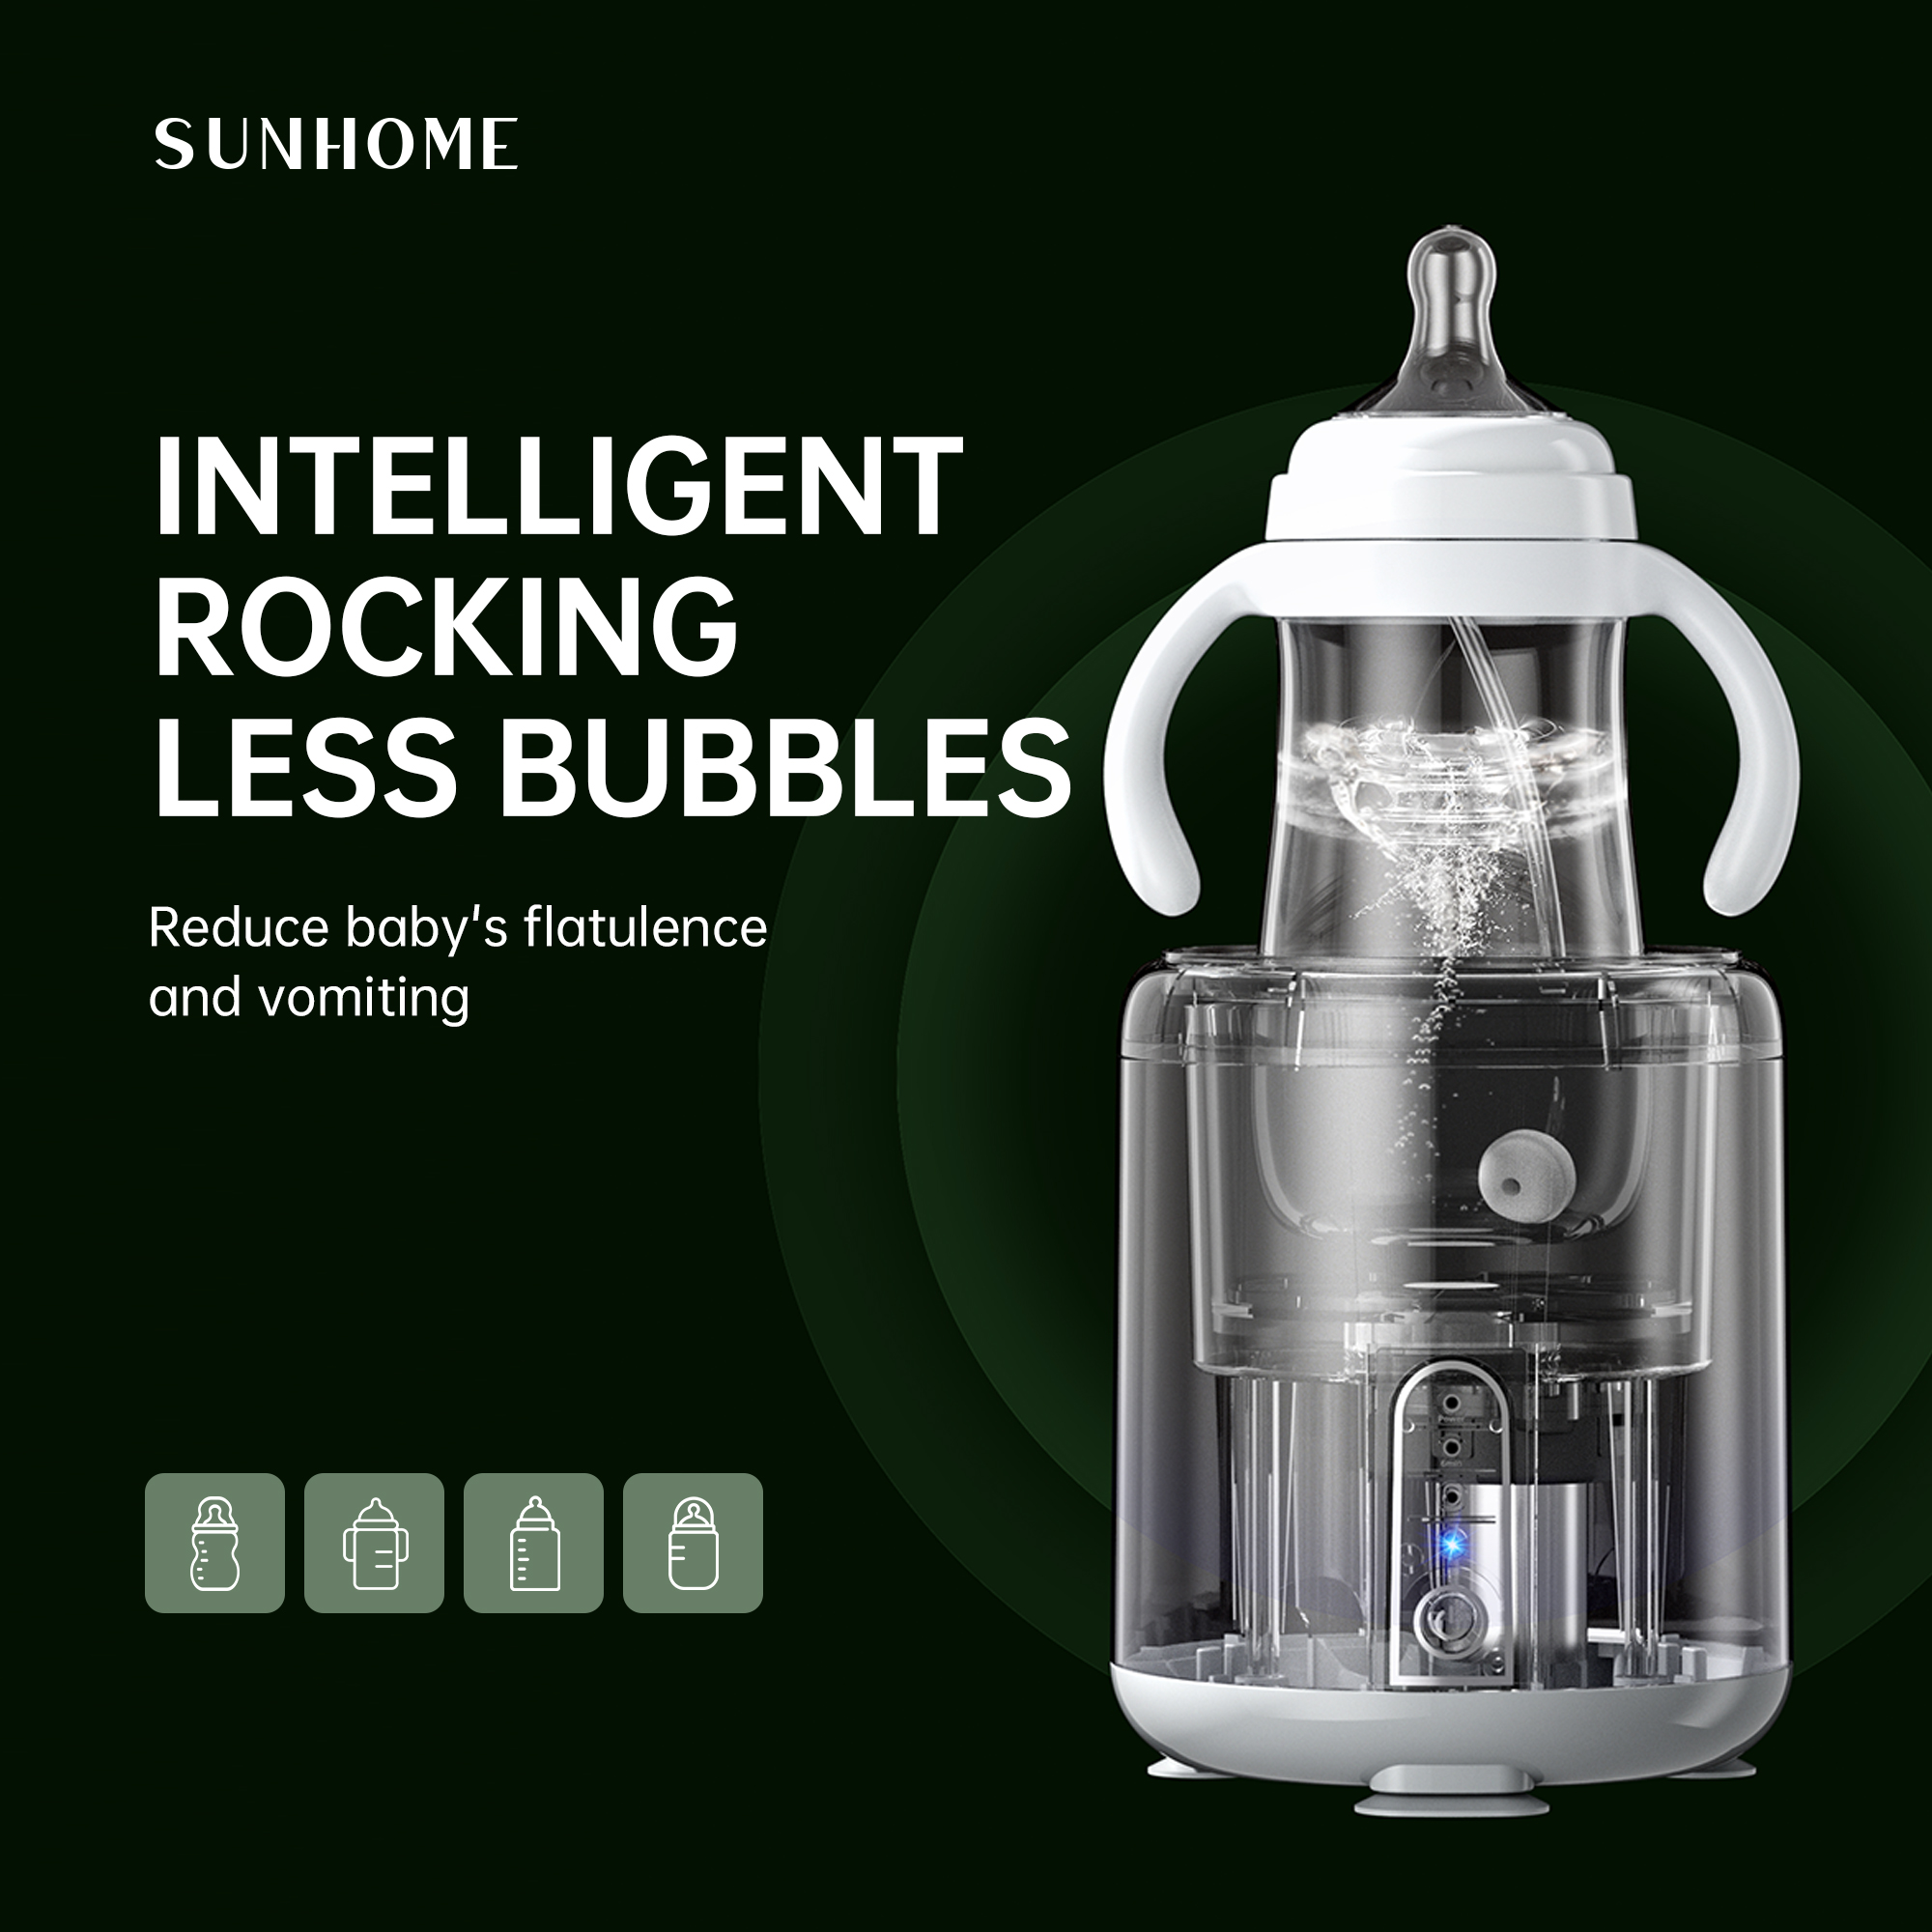 SUNHOME Electric Milk Shaker With USB Green